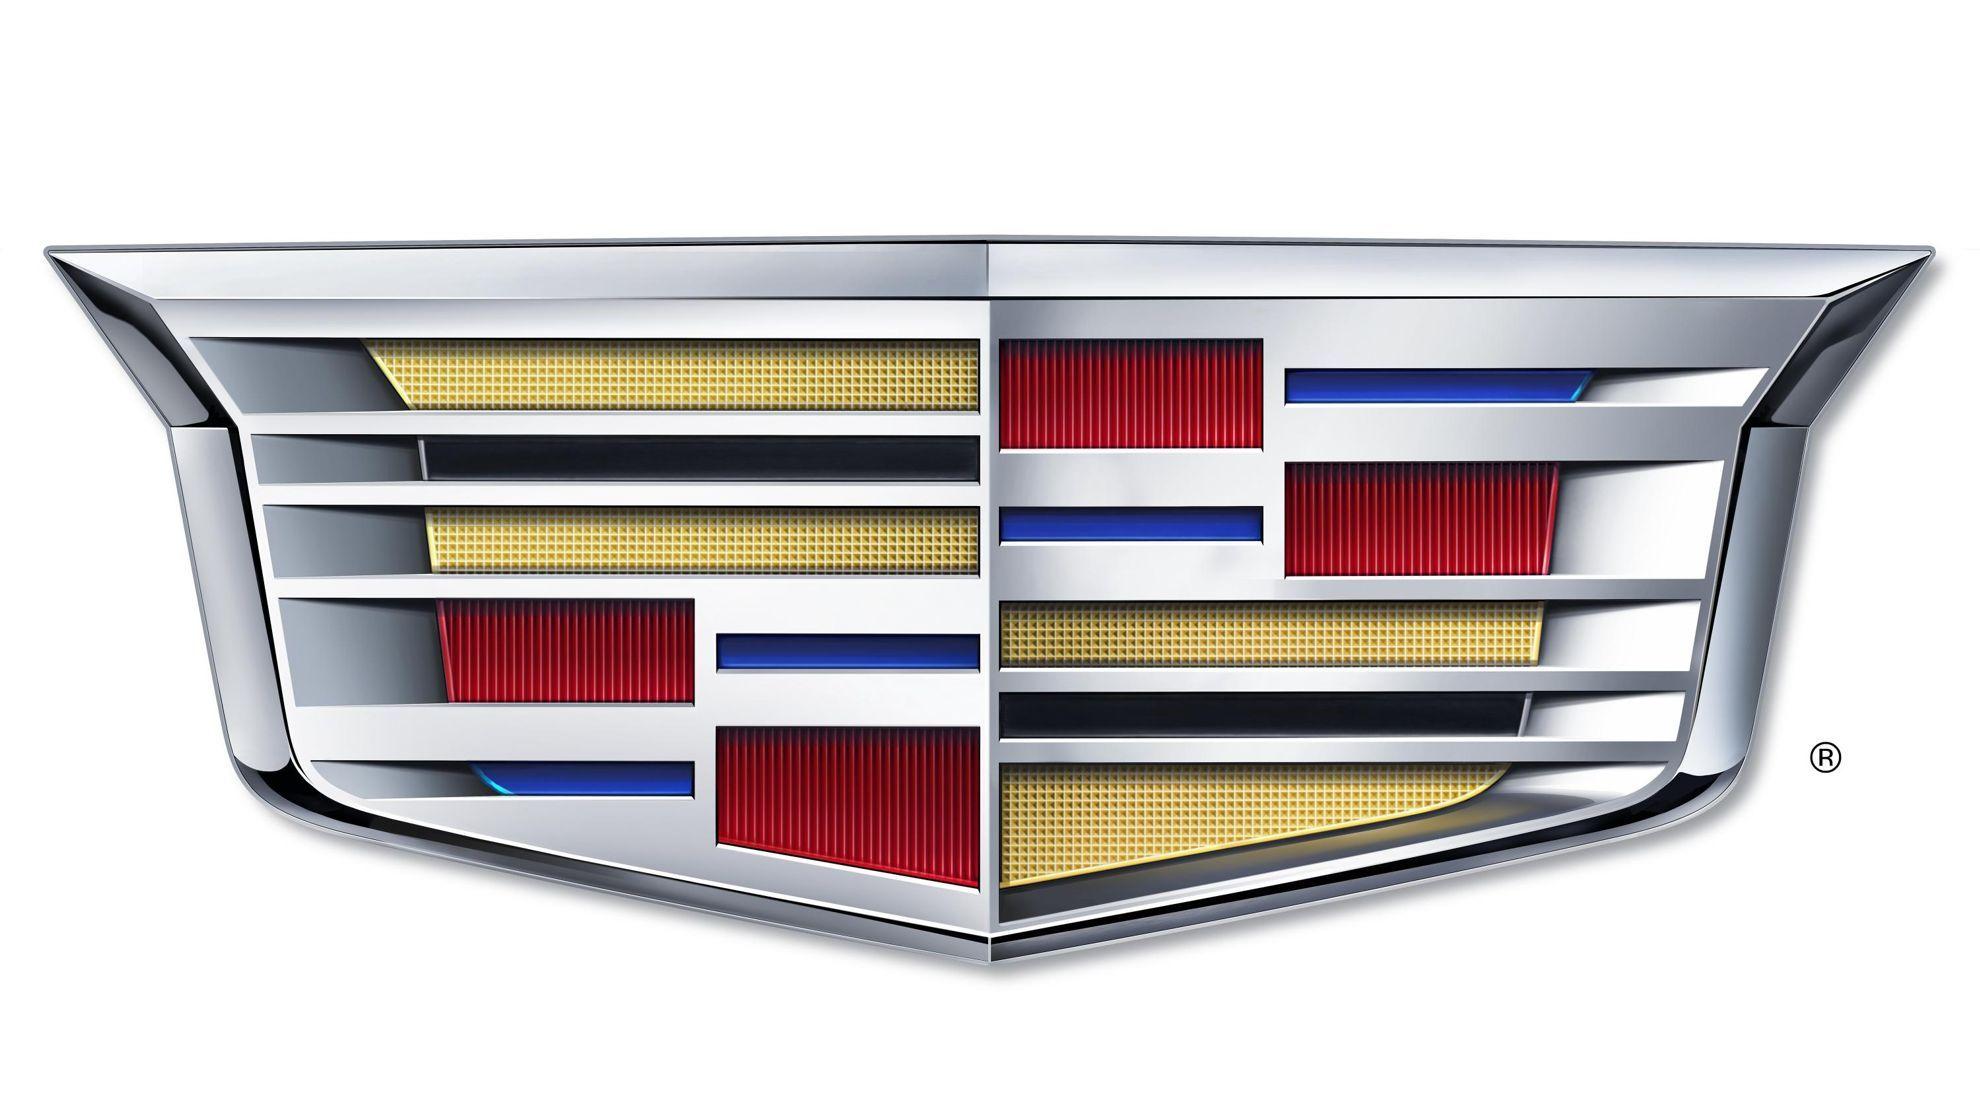 Cadillac Logo - Cadillac Logo, Cadillac Car Symbol Meaning and History | Car Brand ...